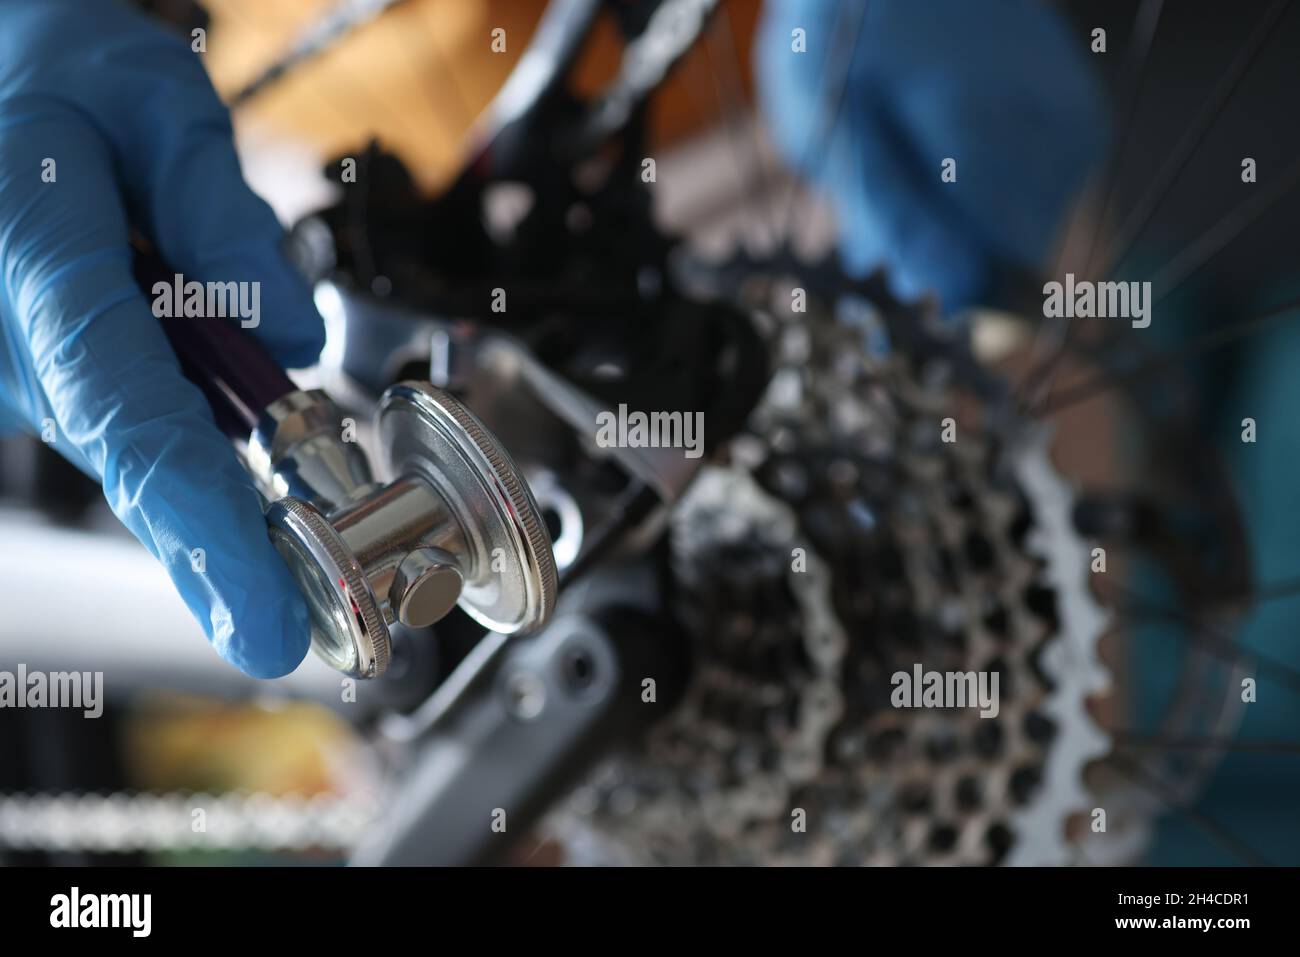 A gloved hand holds a key to adjust the bike Stock Photo